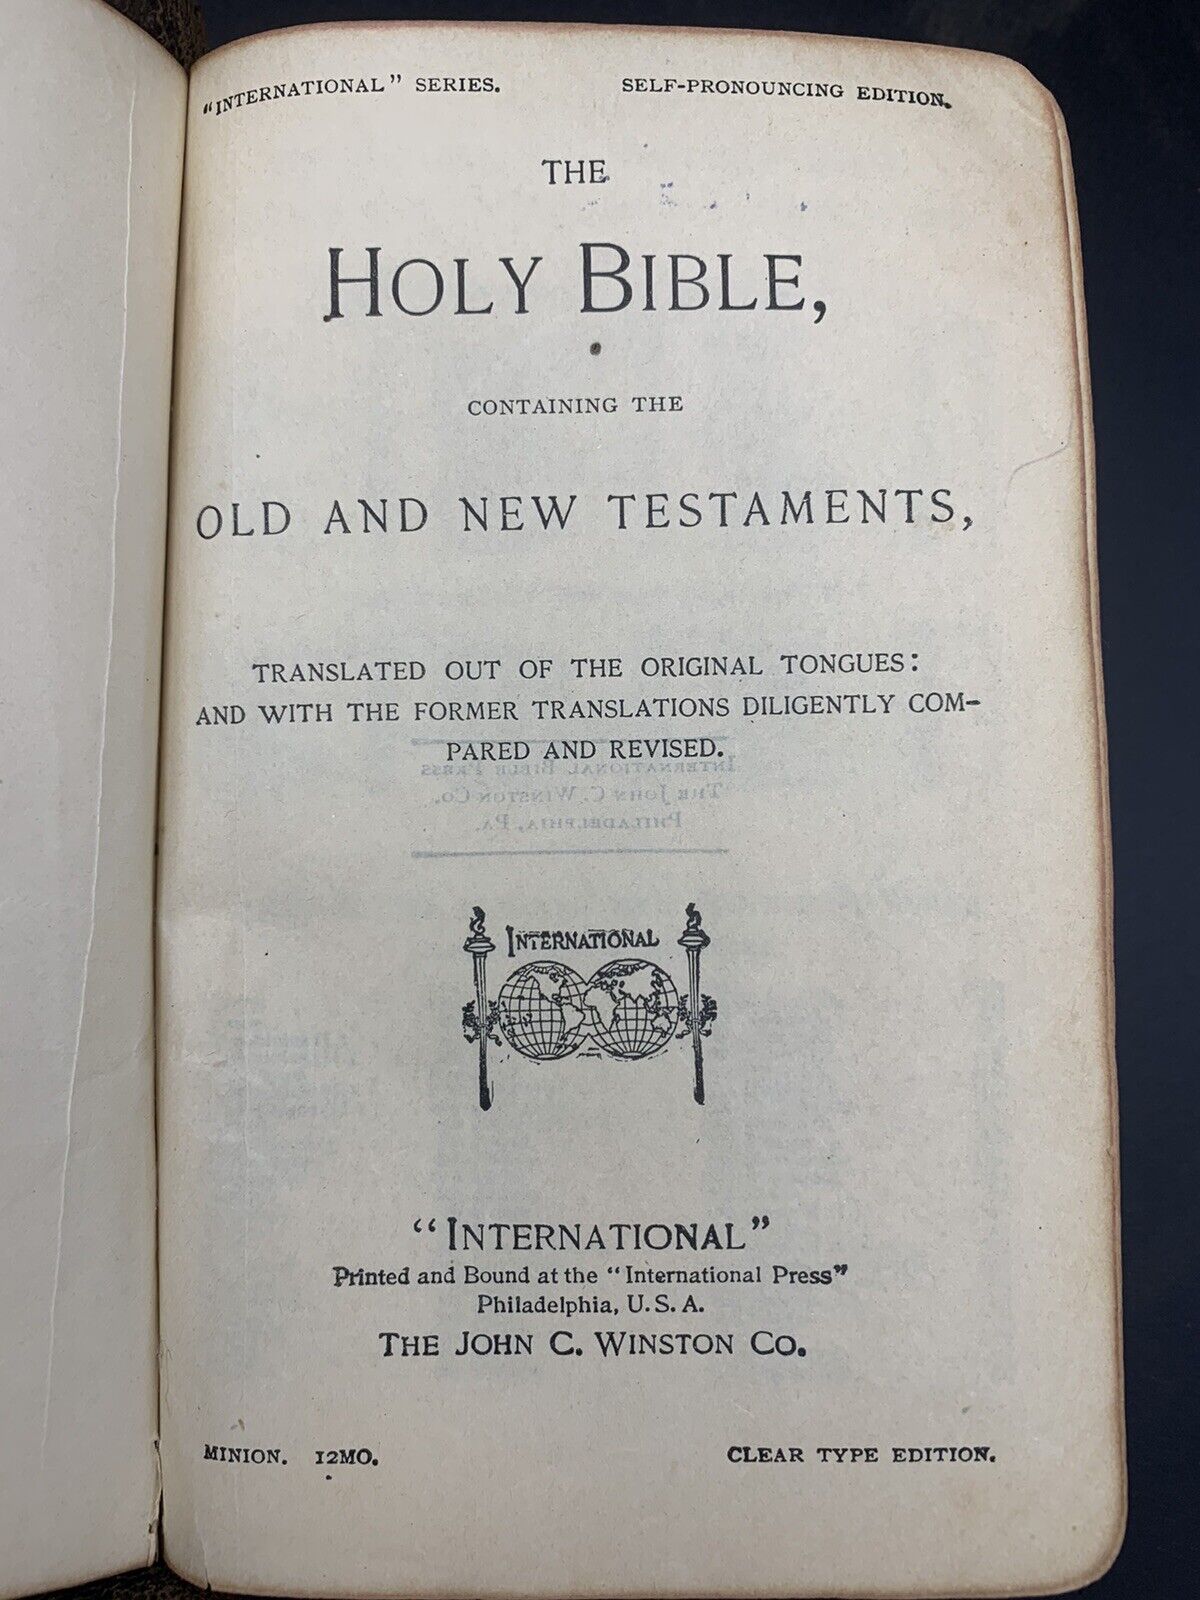 THE HOLY BIBLE, 1913, “International” Series, Self- Pronouncing Edition